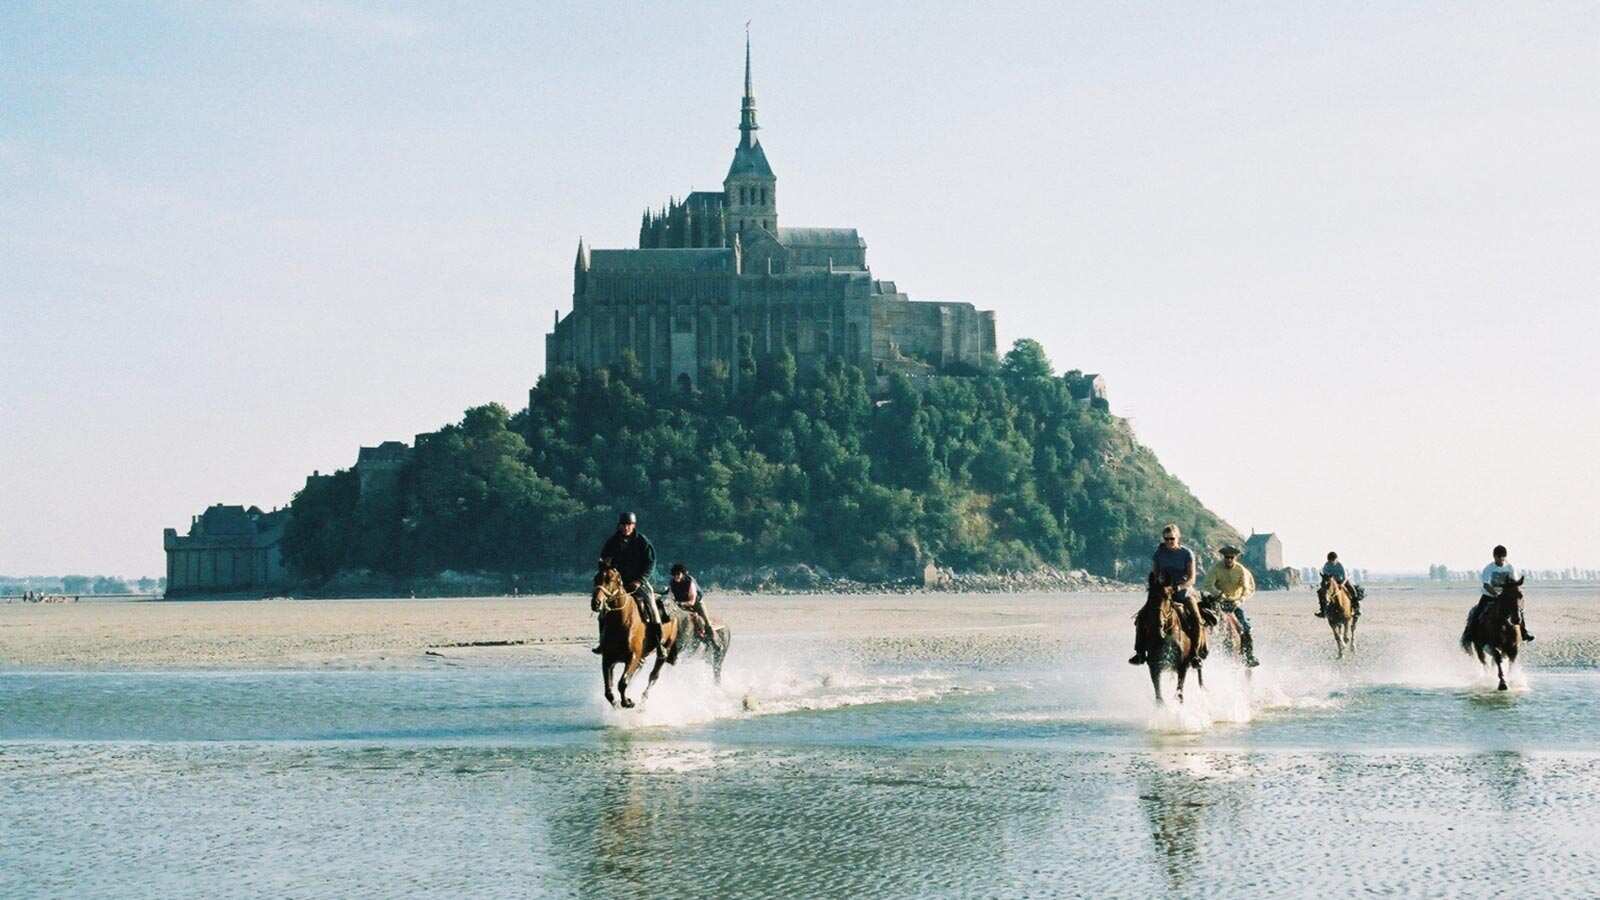 Horse racing event across water in Normandy, France